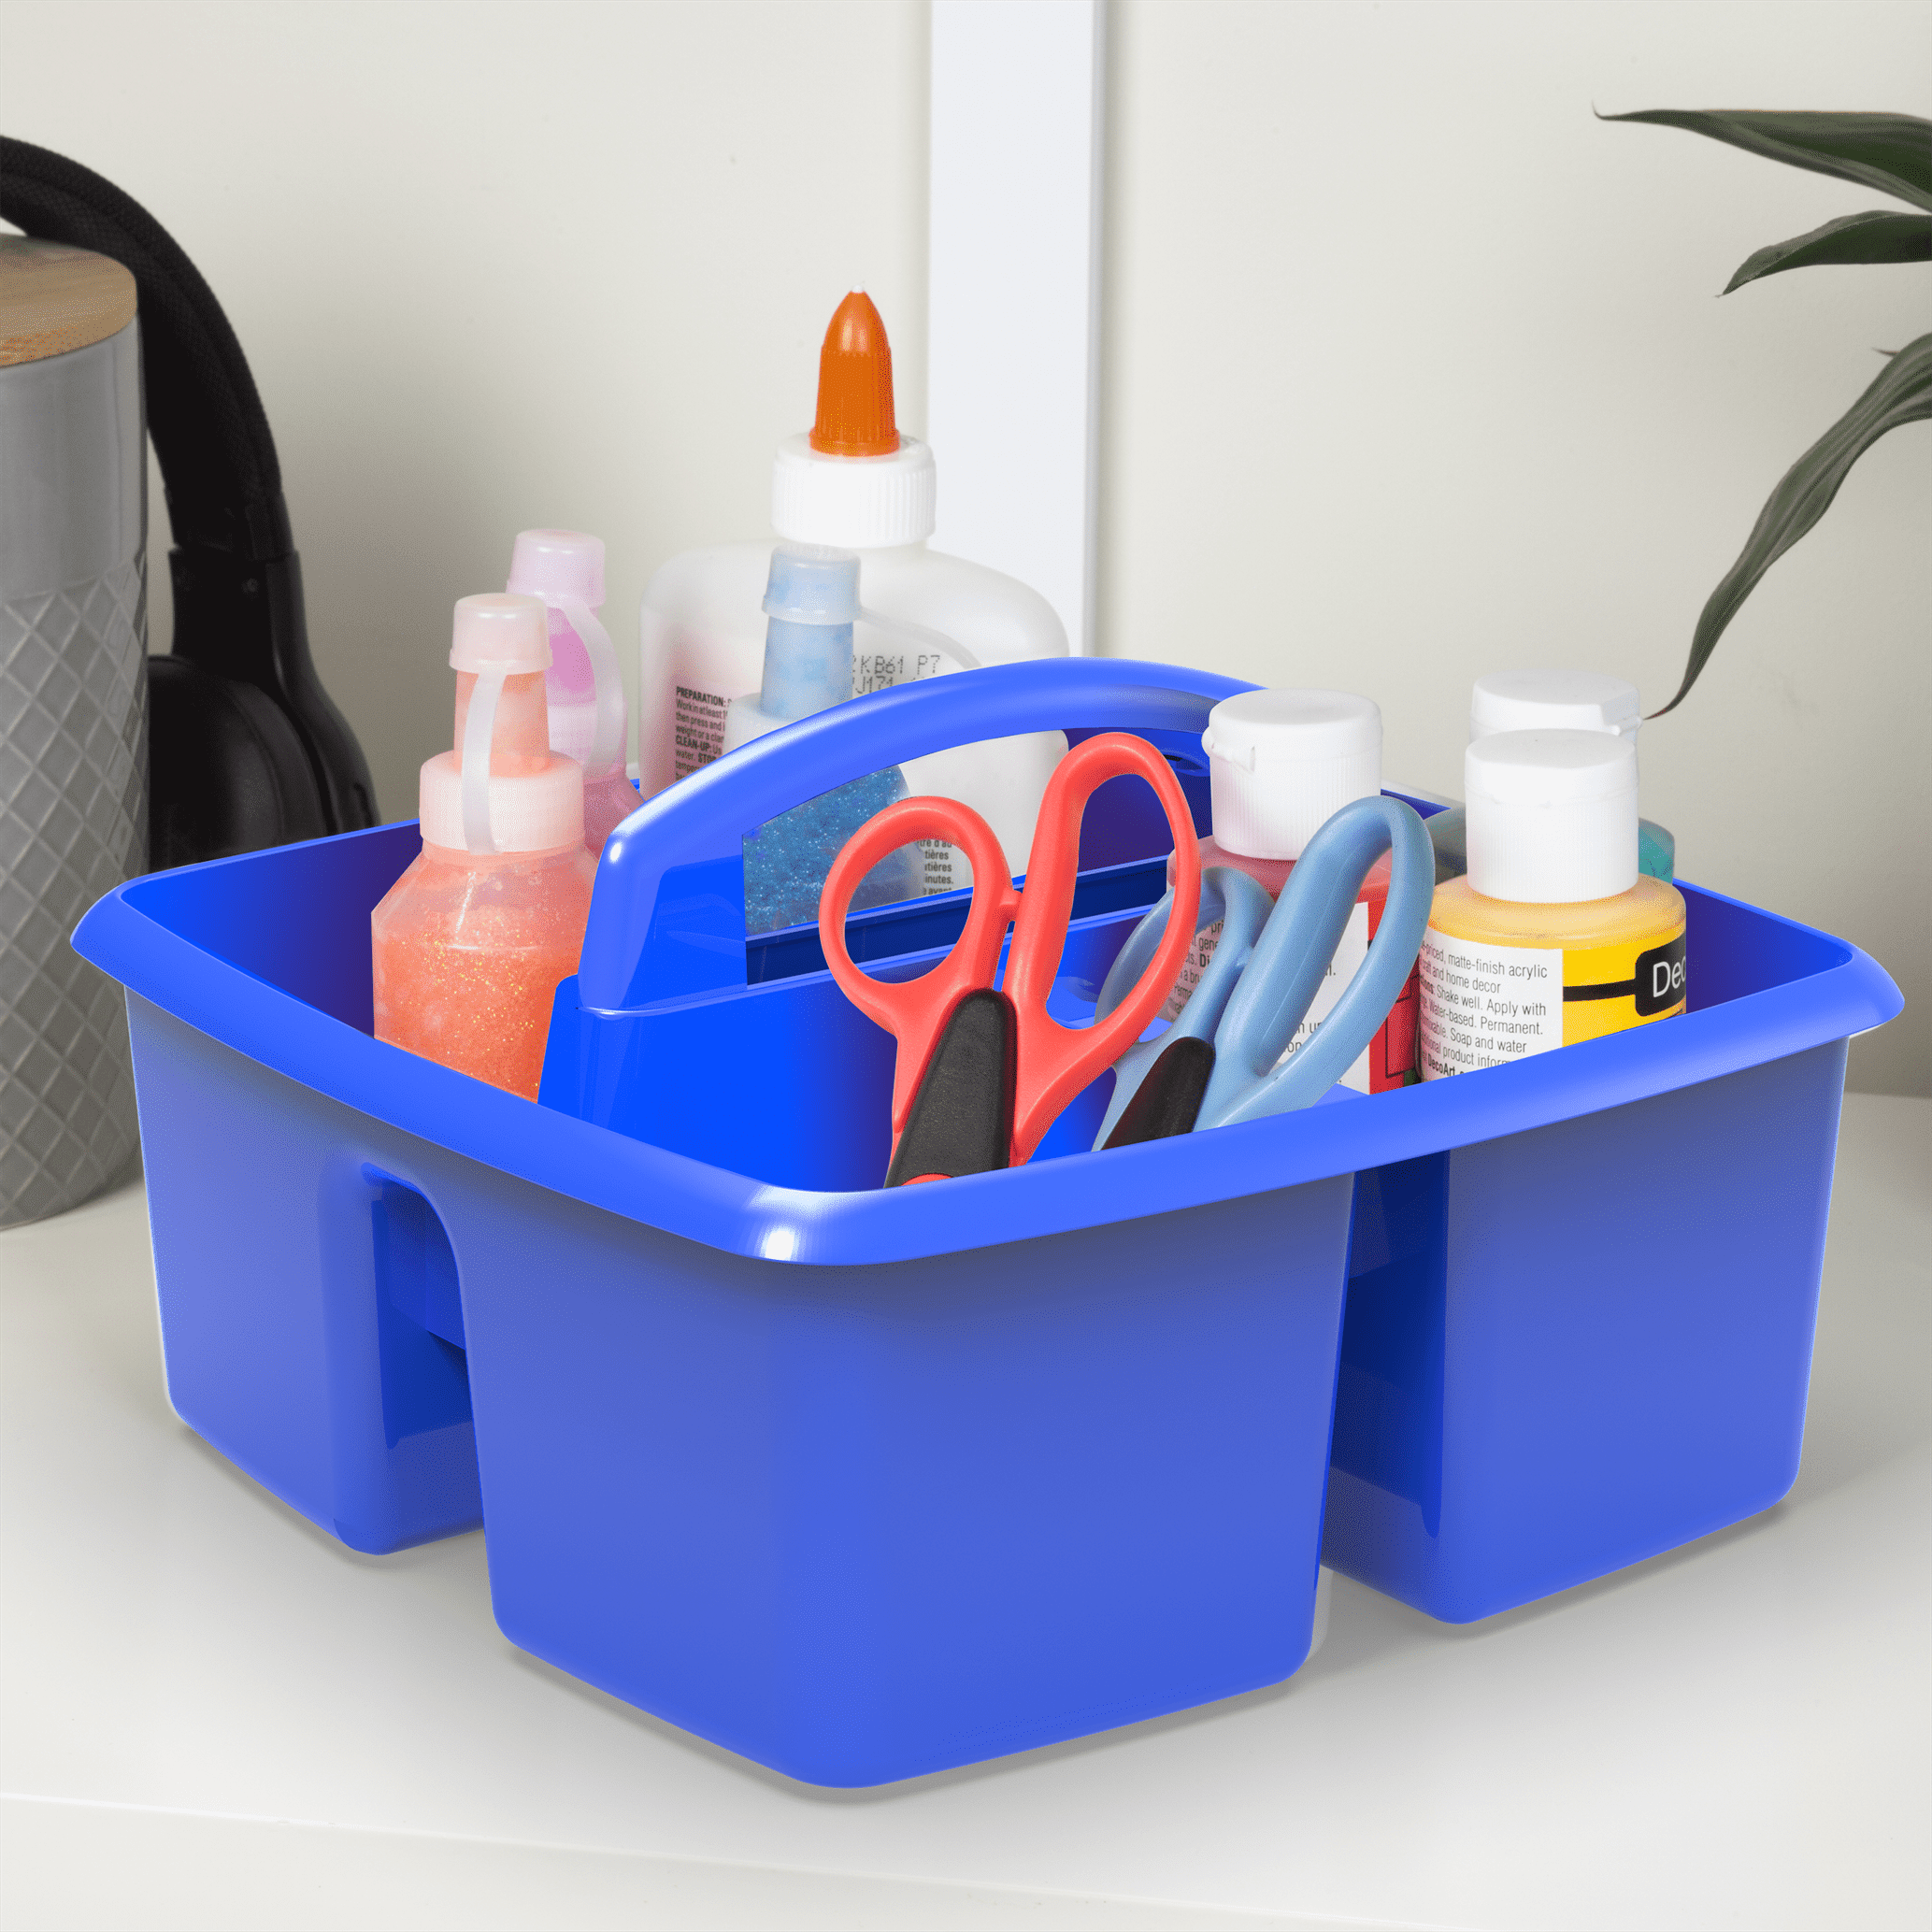 Multipurpose Caddy Organizer - Stackable Plastic Caddy with Handle, Desk